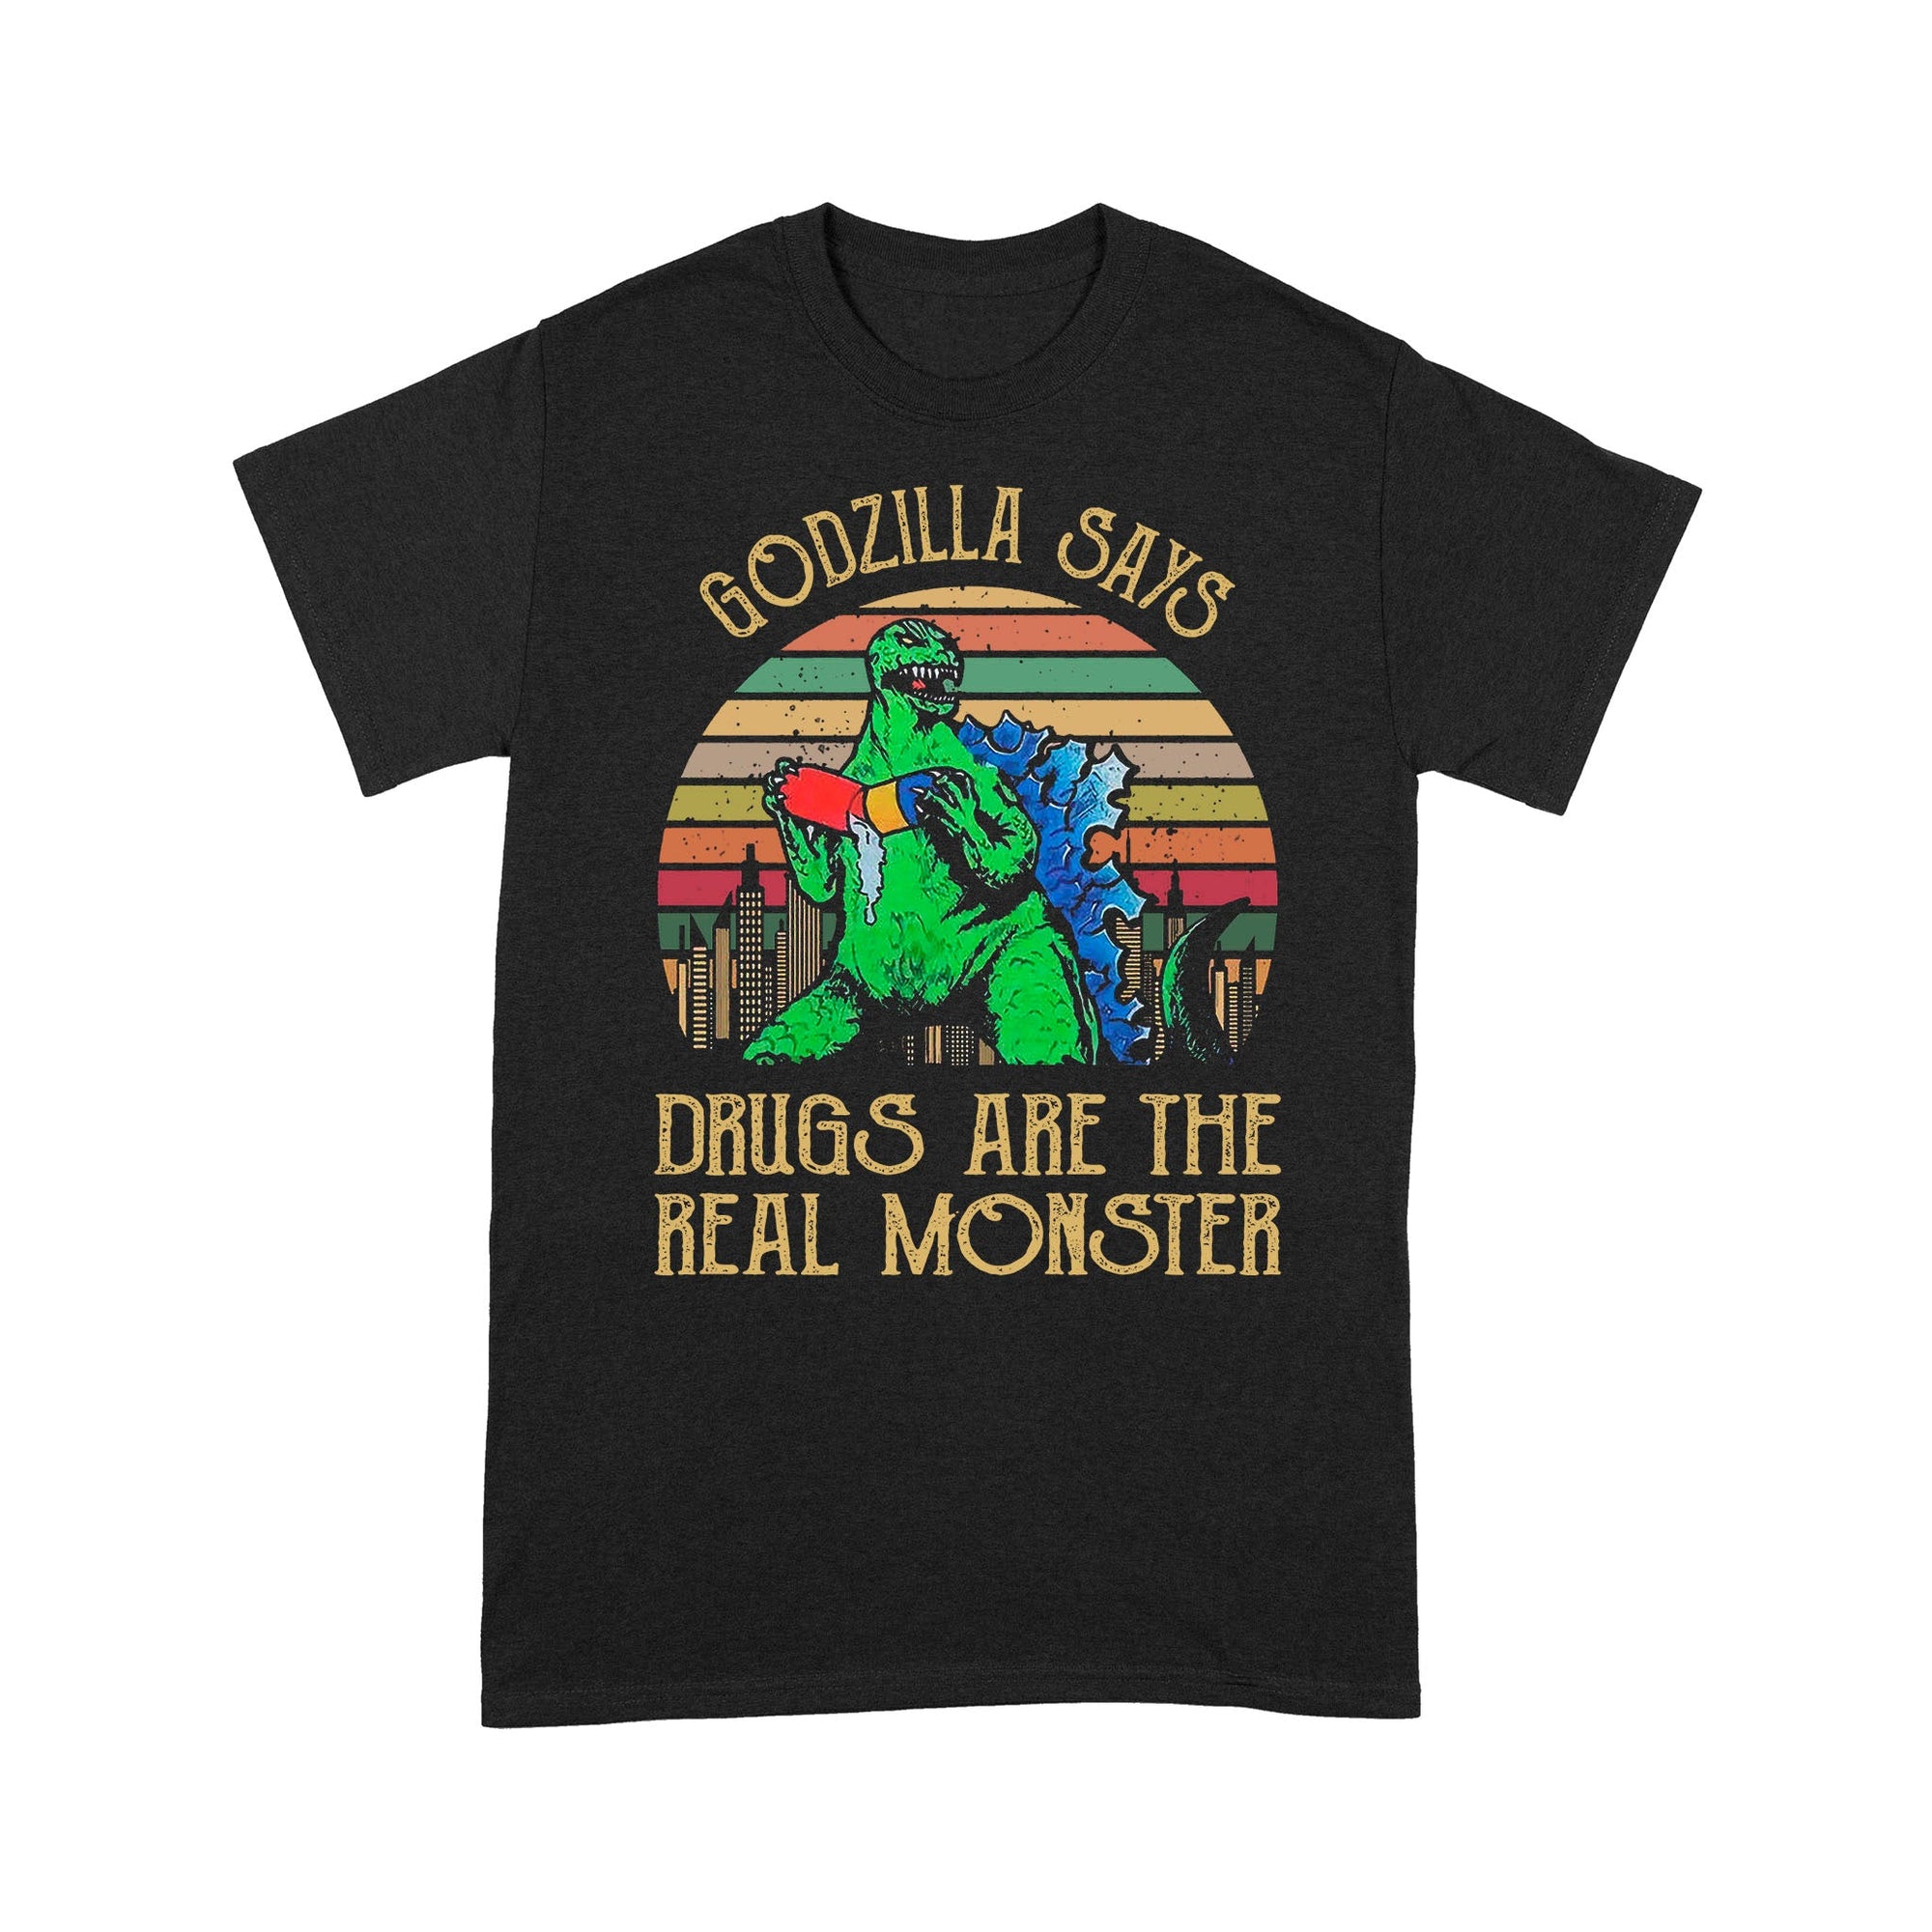 Godzilla says drugs are the real monster Standard T-Shirt